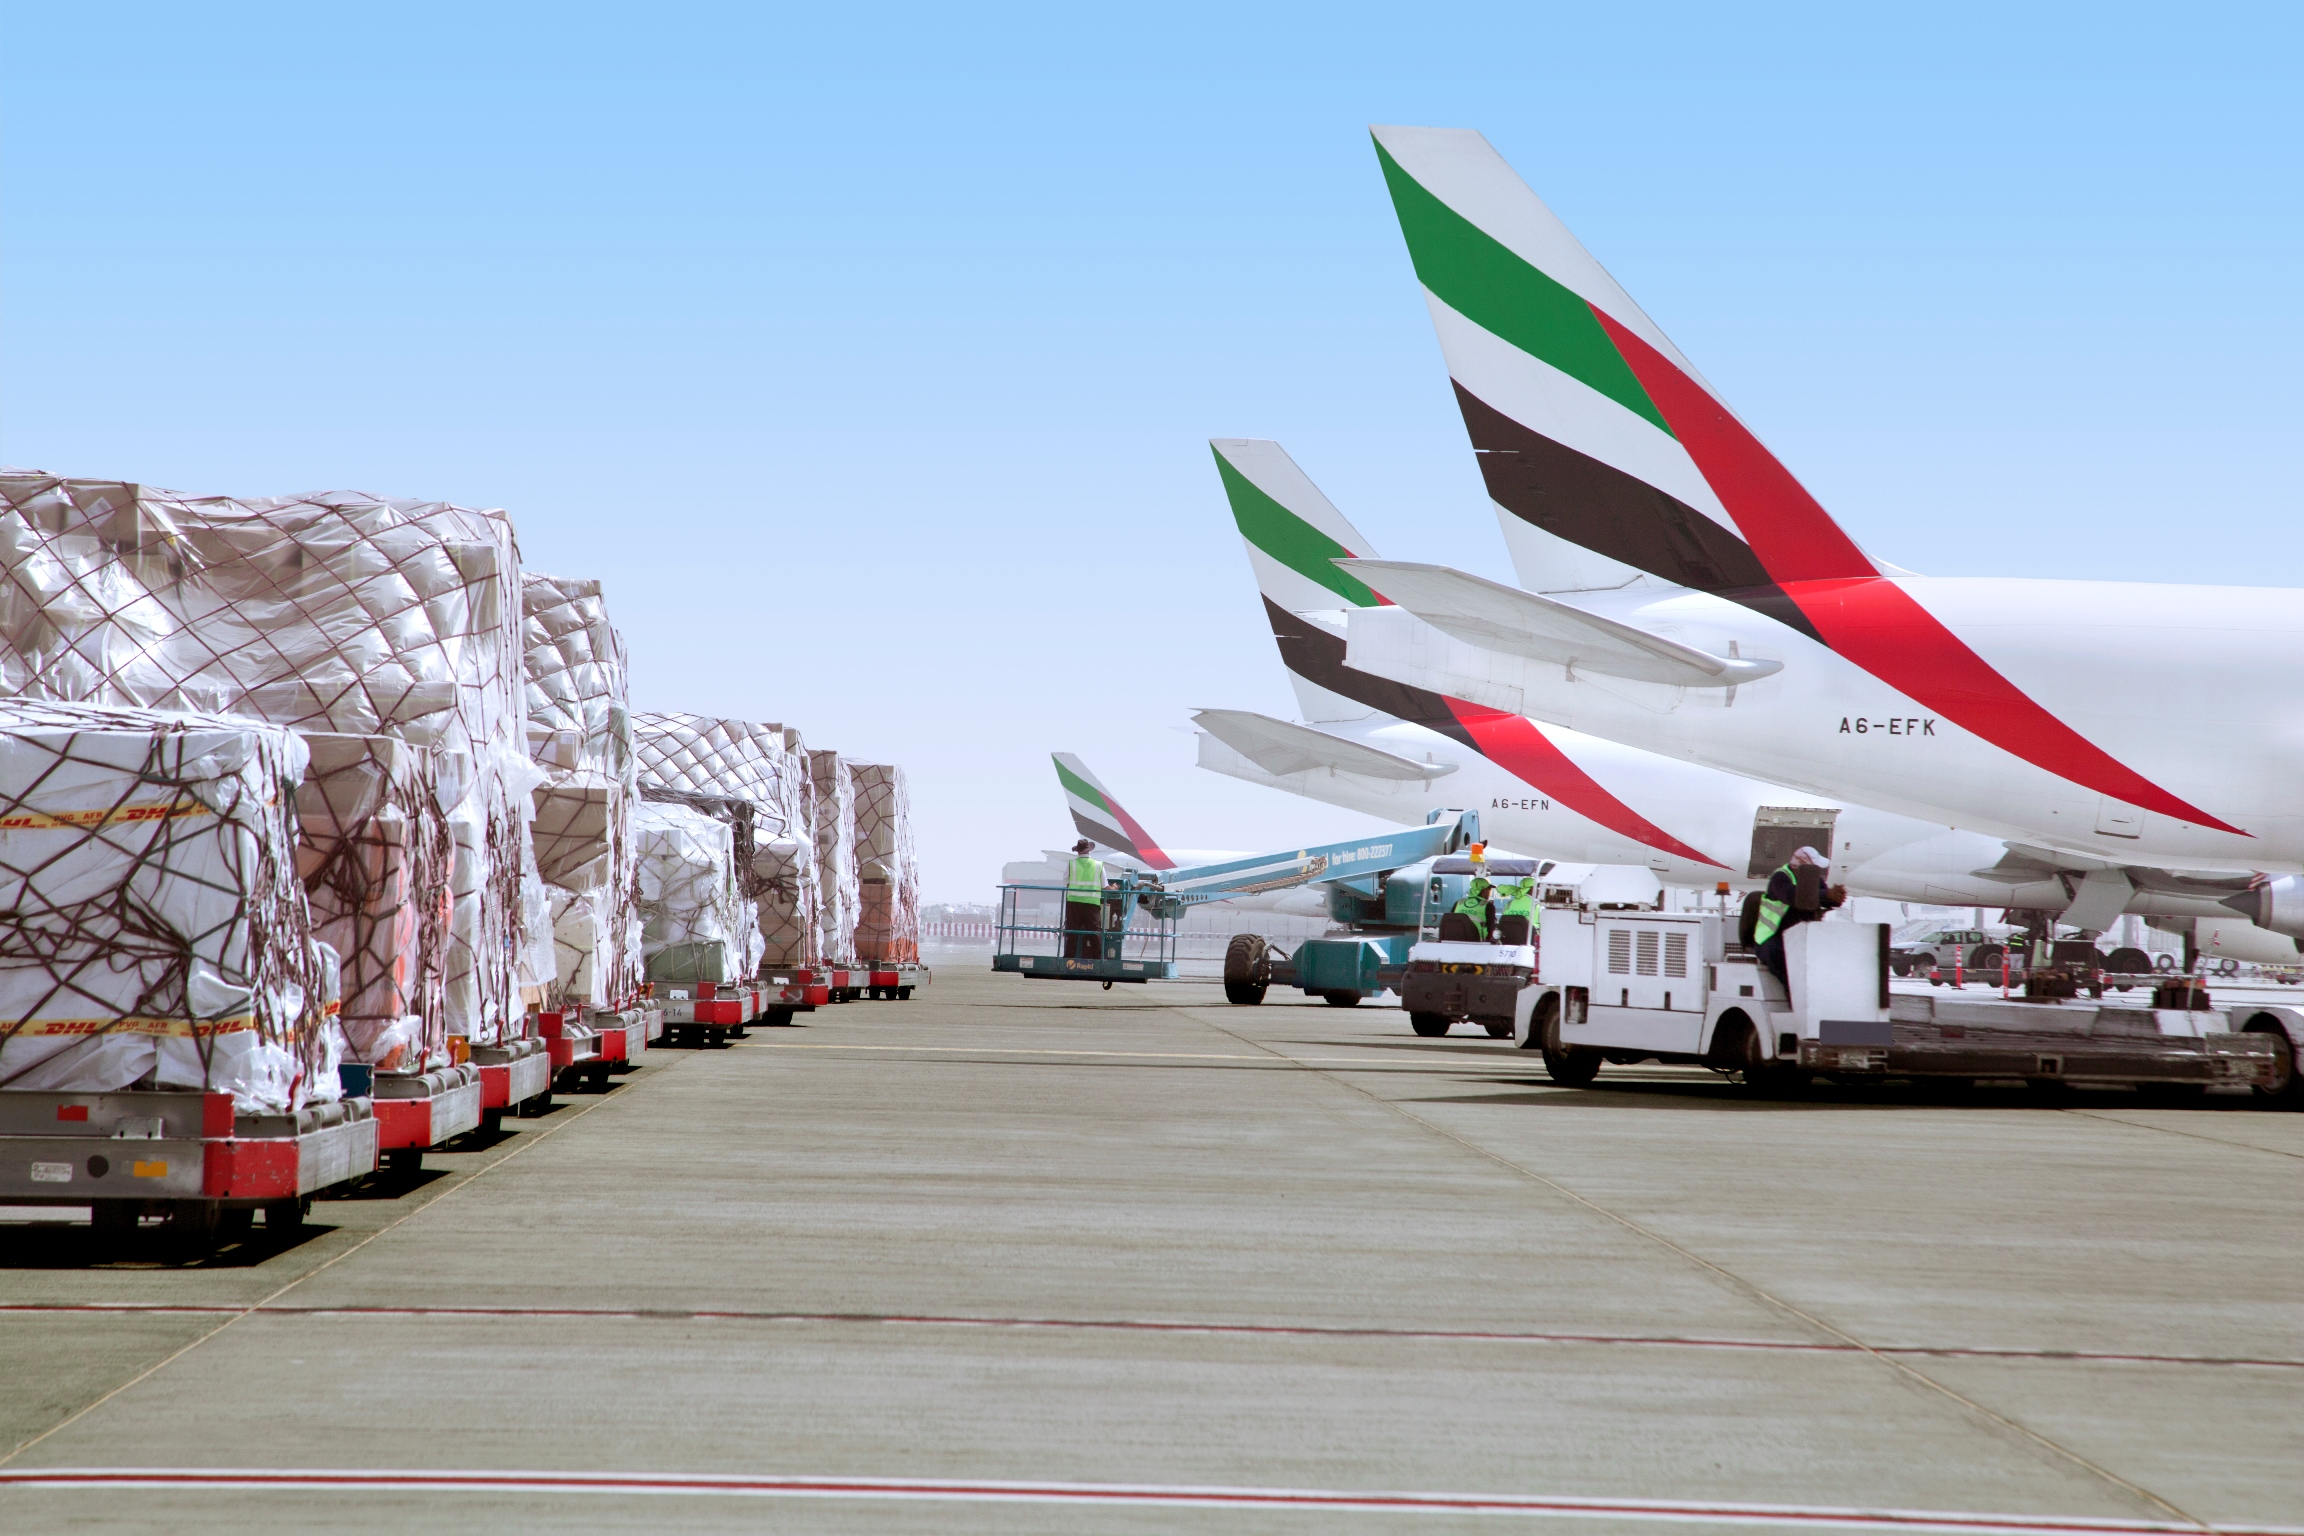 Emirates SkyCargo to add two new UK destinations - The Aviator Middle East